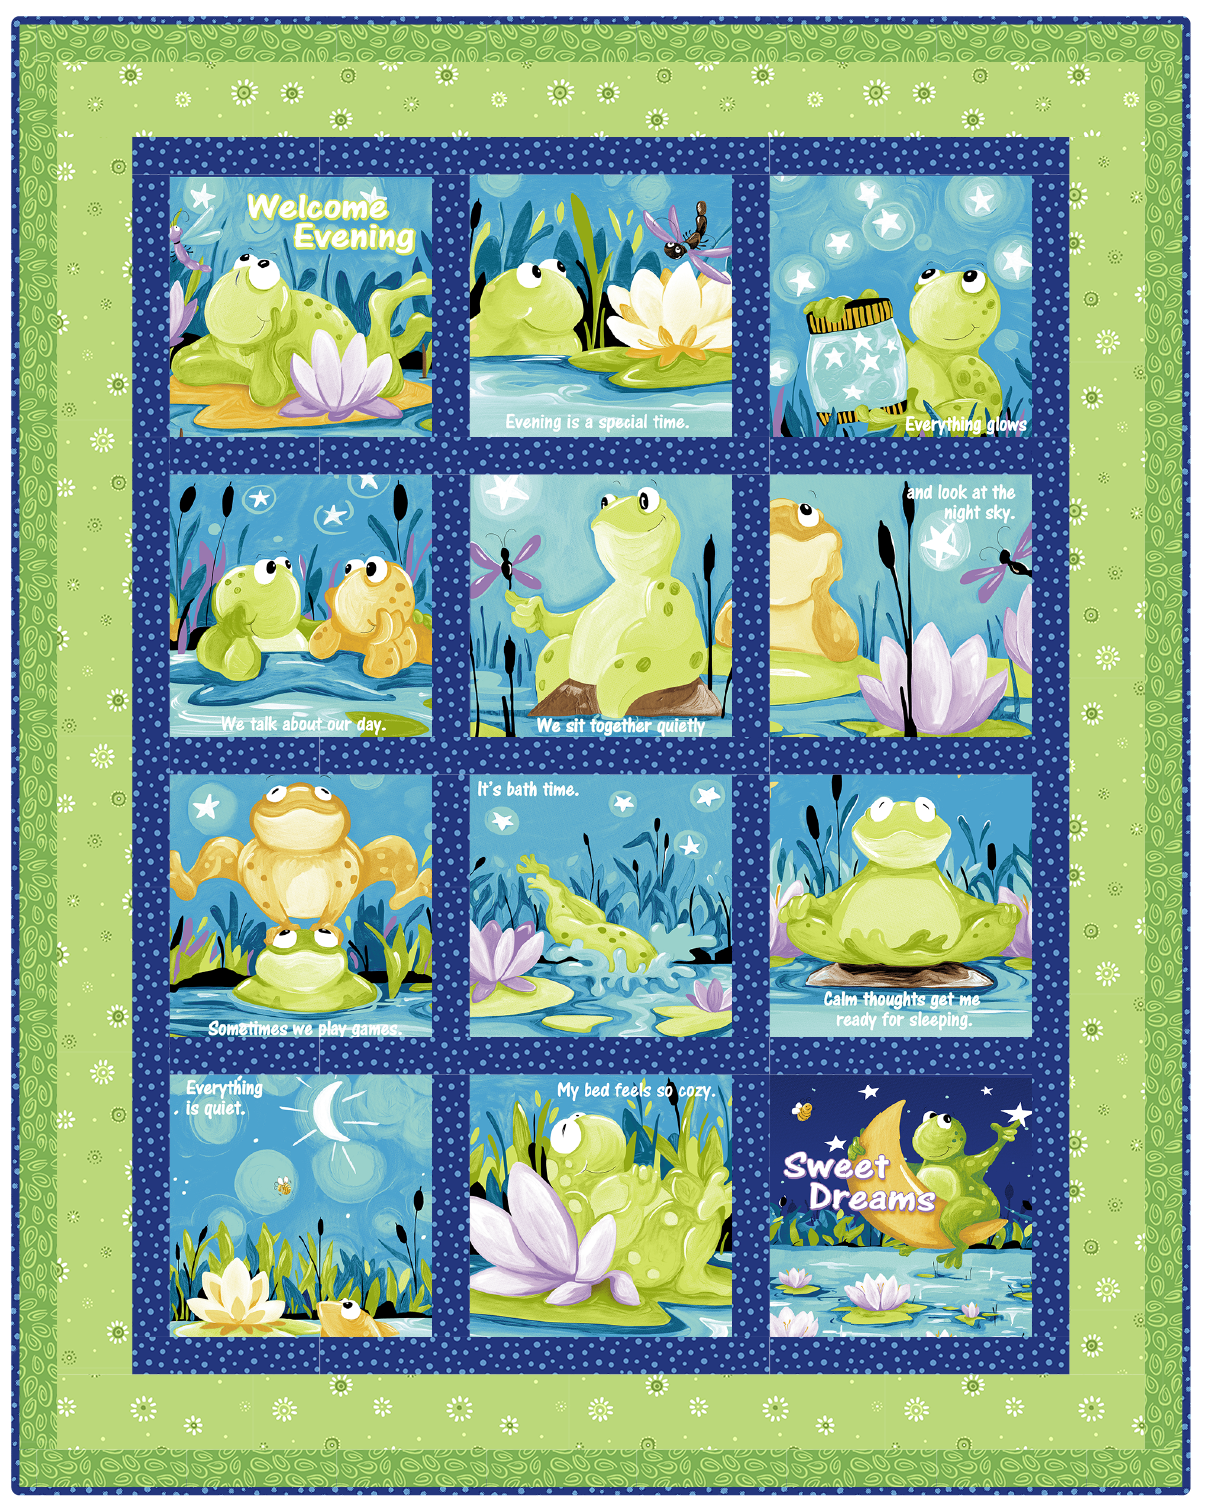 Paul's Pond Easy Storybook Panel Quilt Kit-Susybee-My Favorite Quilt Store